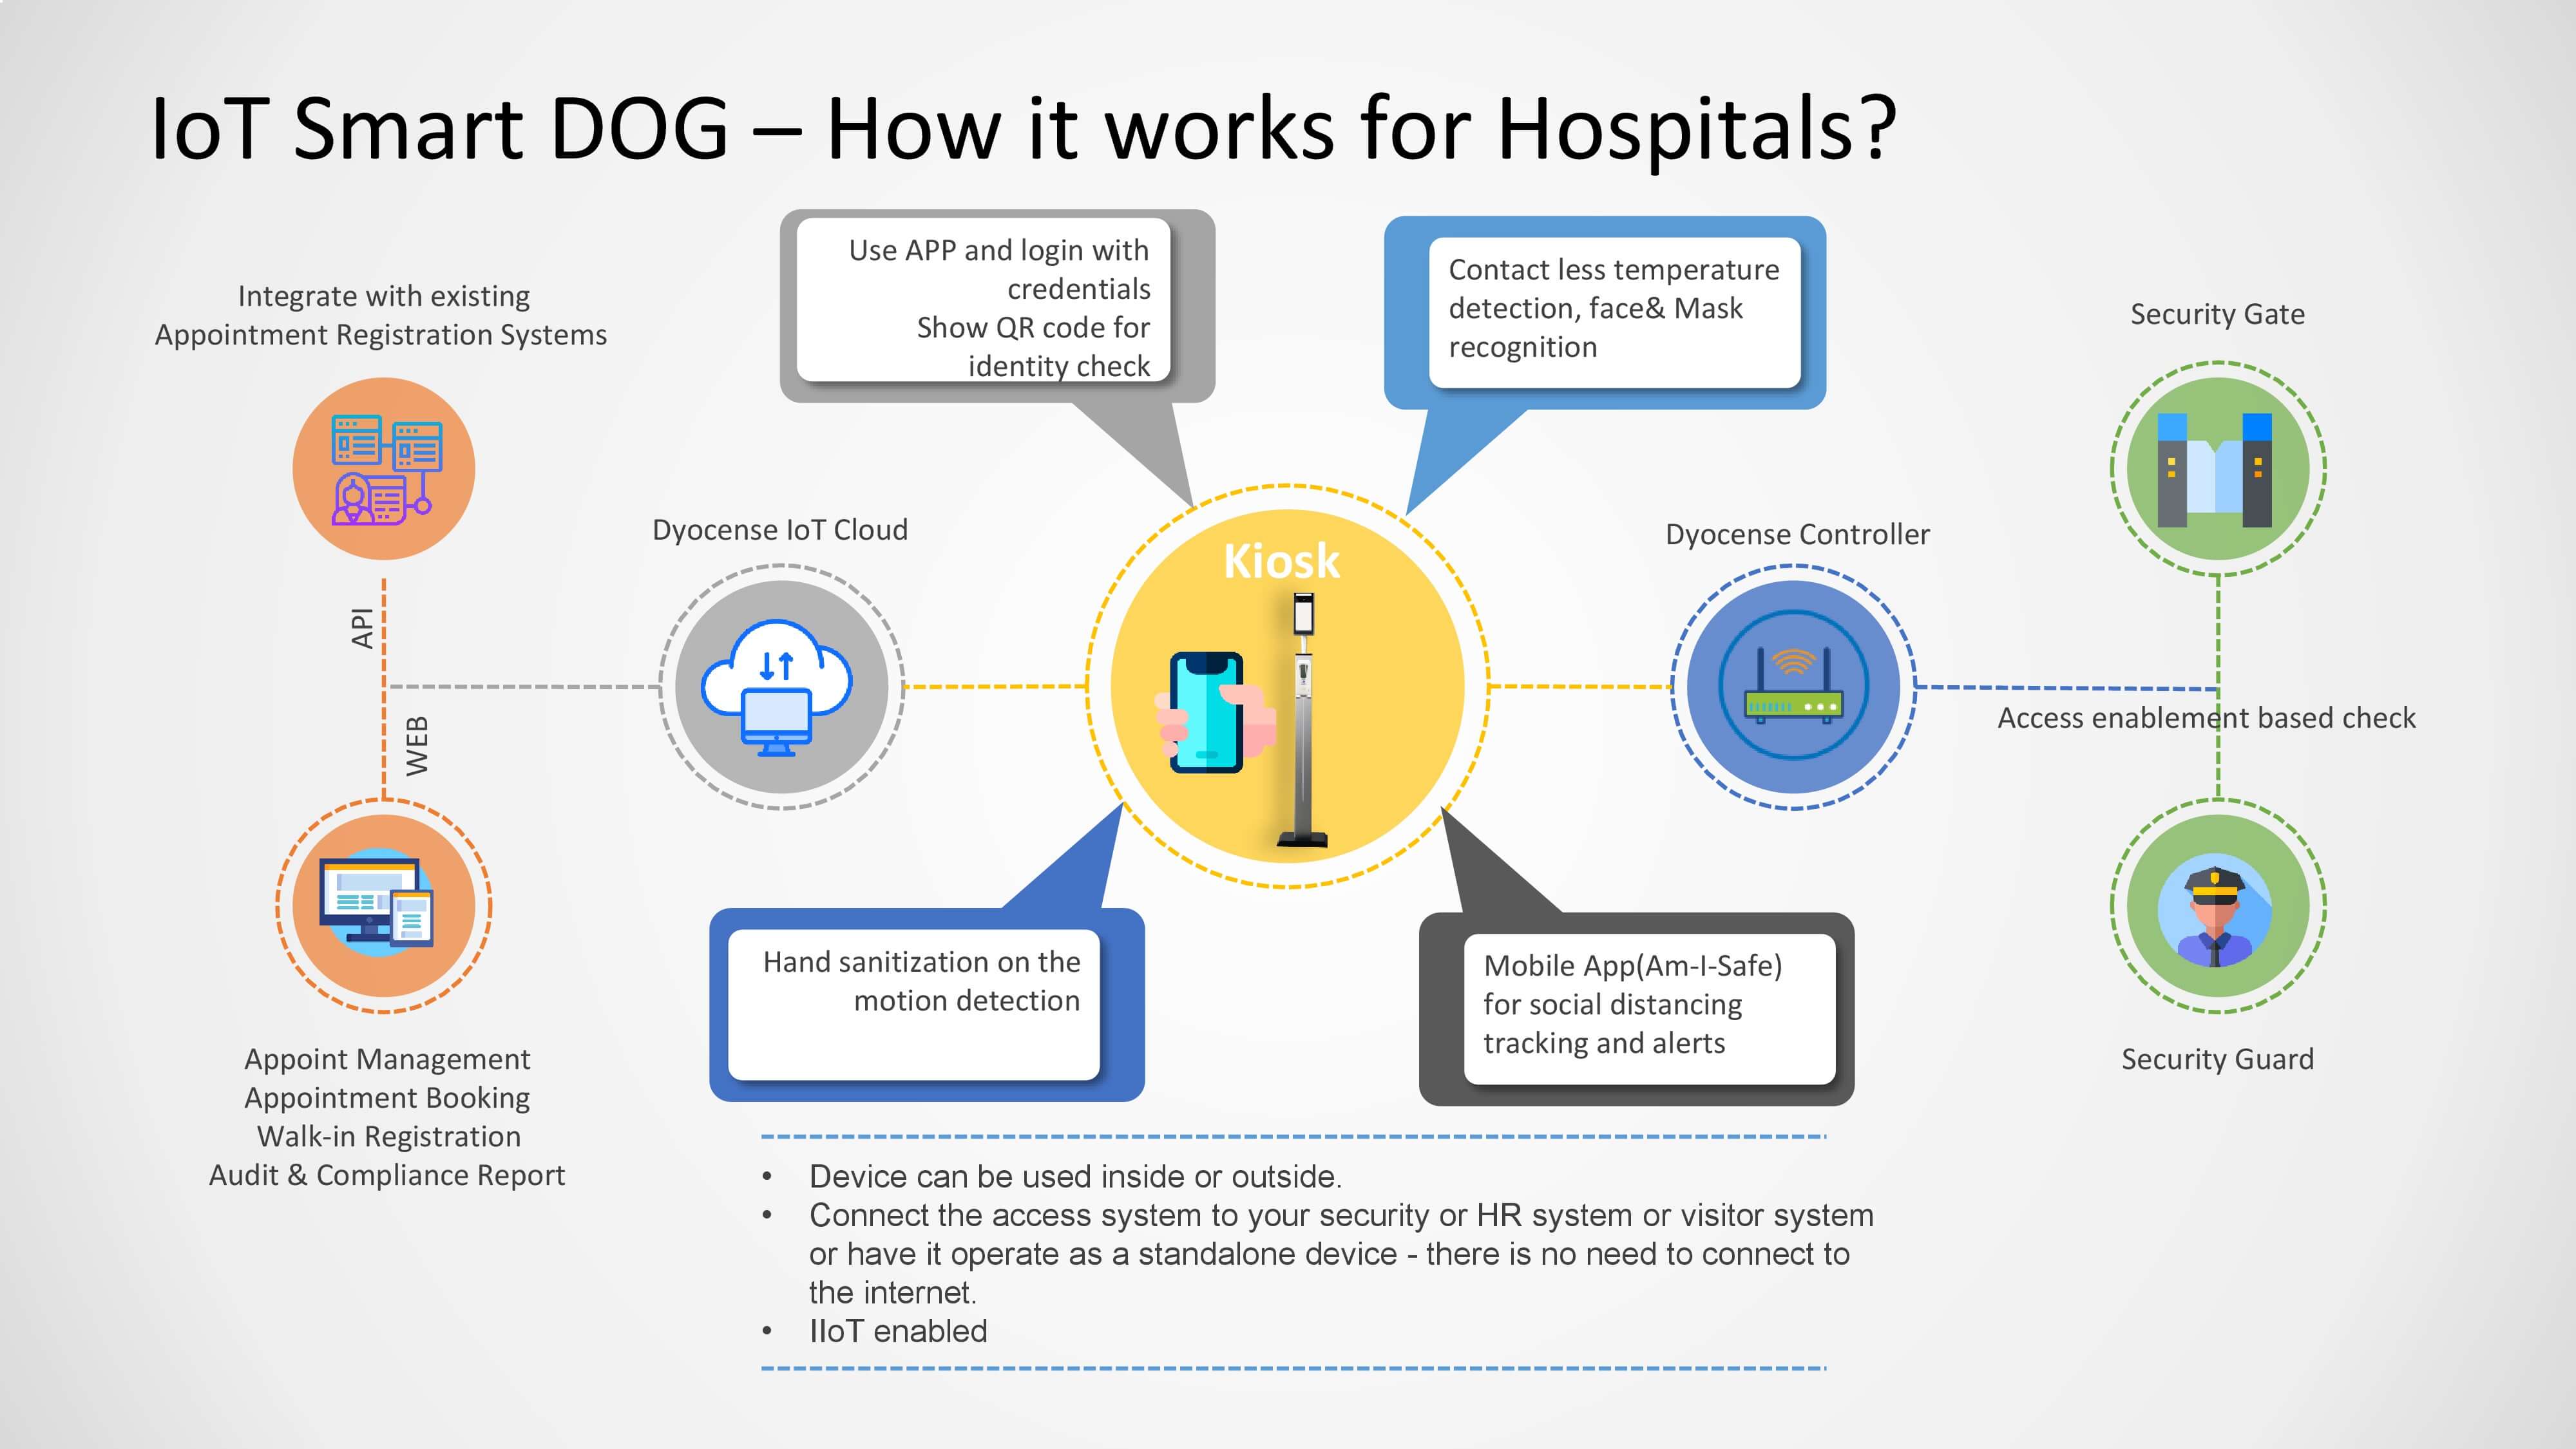 DyoCense IoT smart dog for Hospitals poster